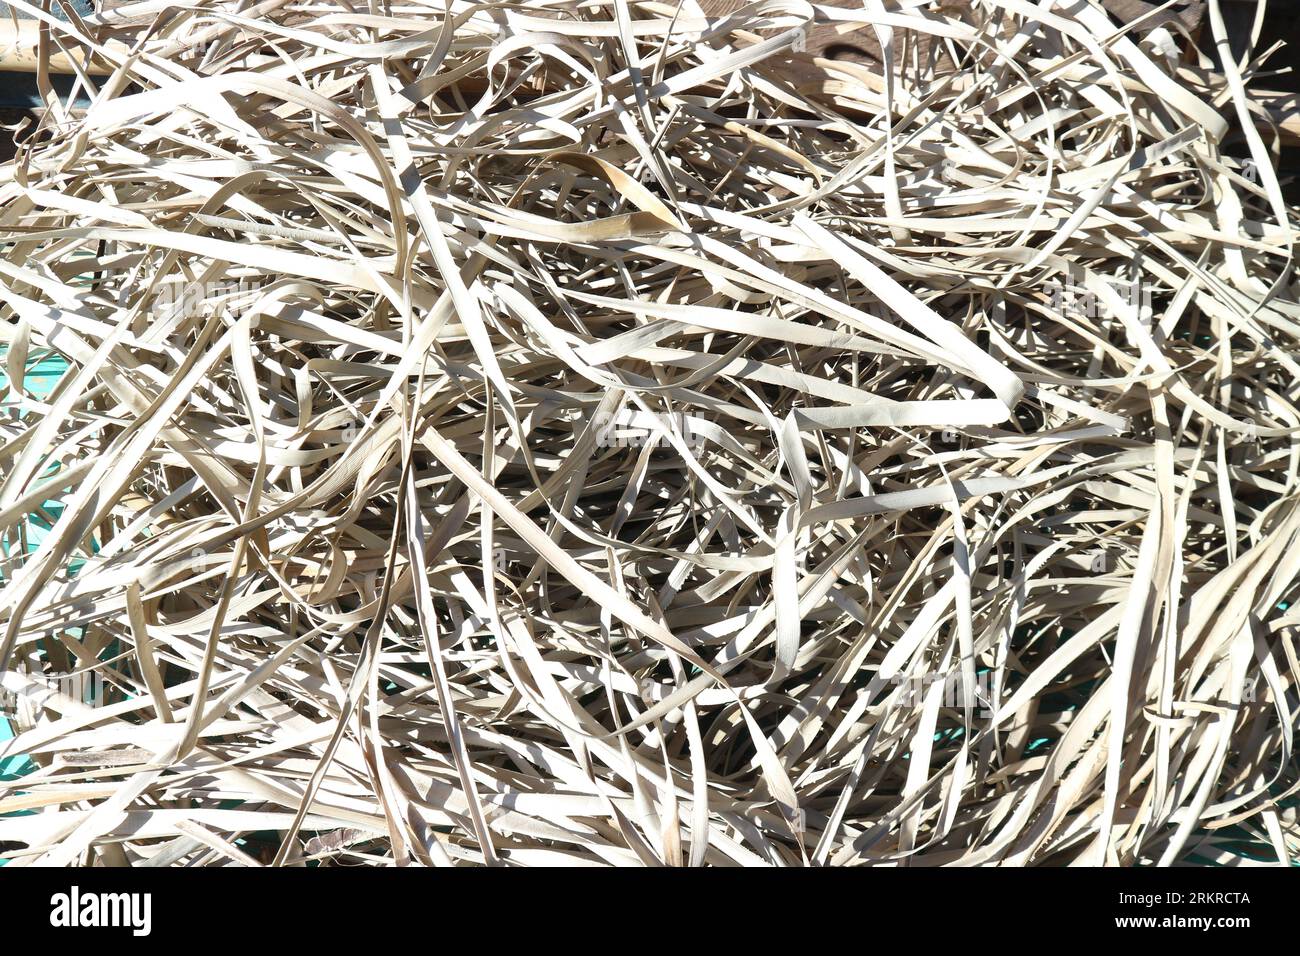 Dried pandanus leaves ready to be woven into mats. Before weaving these raw materials must be completely dry Stock Photo